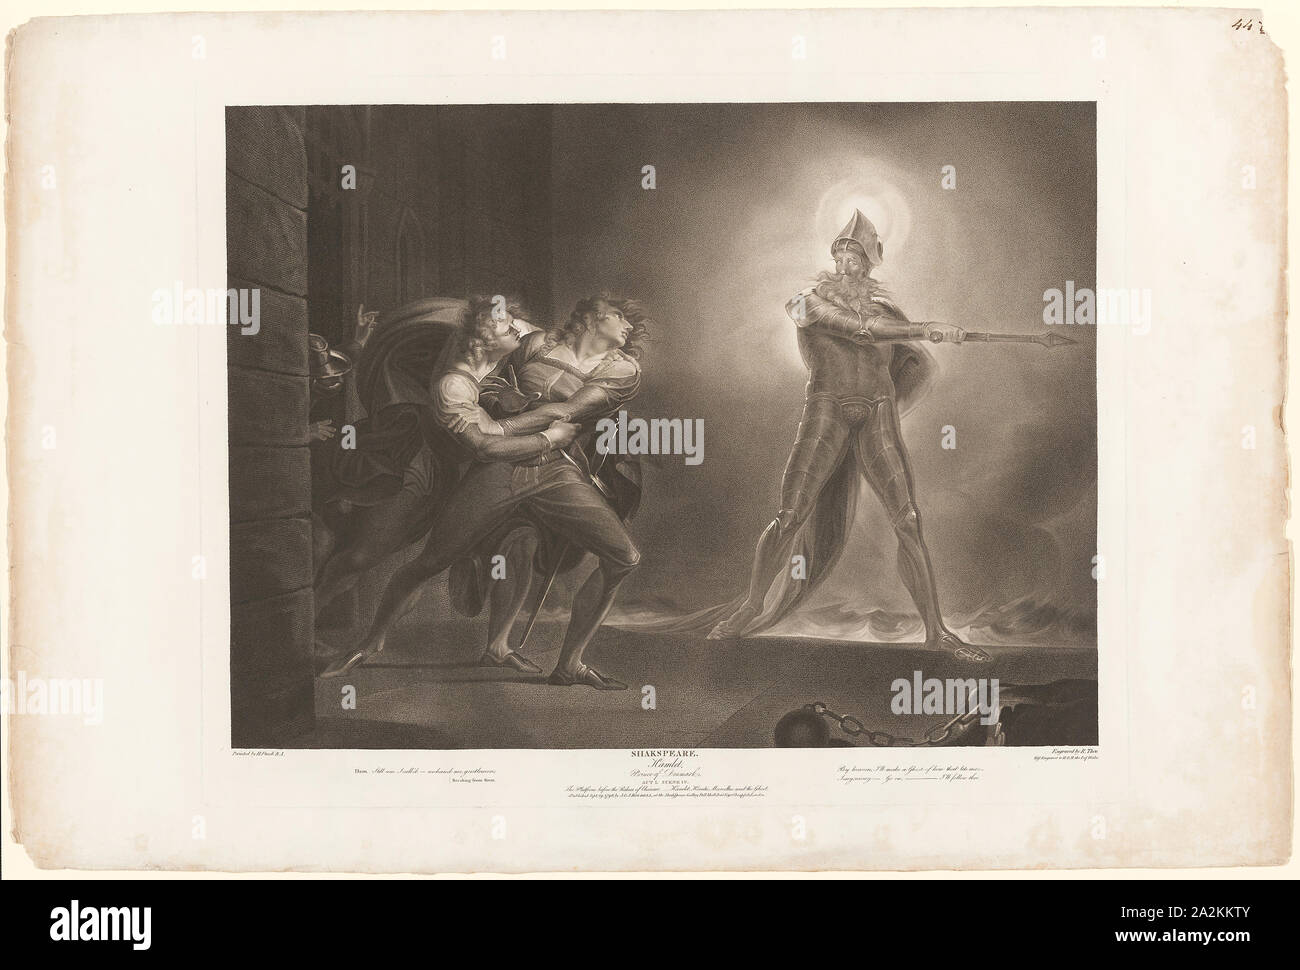 Hamlet, Horatio, Marcellus and the Ghost, 1796, Robert Thew (English, 1758-1802), after Henry Fuseli (Swiss, active in England, 1741-1825), published by John Boydell (English, 1719-1804), authored by William Shakespeare (English, 1564-1616), England, Engraving on ivory wove paper, 502 × 637 mm (plate), 593 × 880 mm (sheet Stock Photo